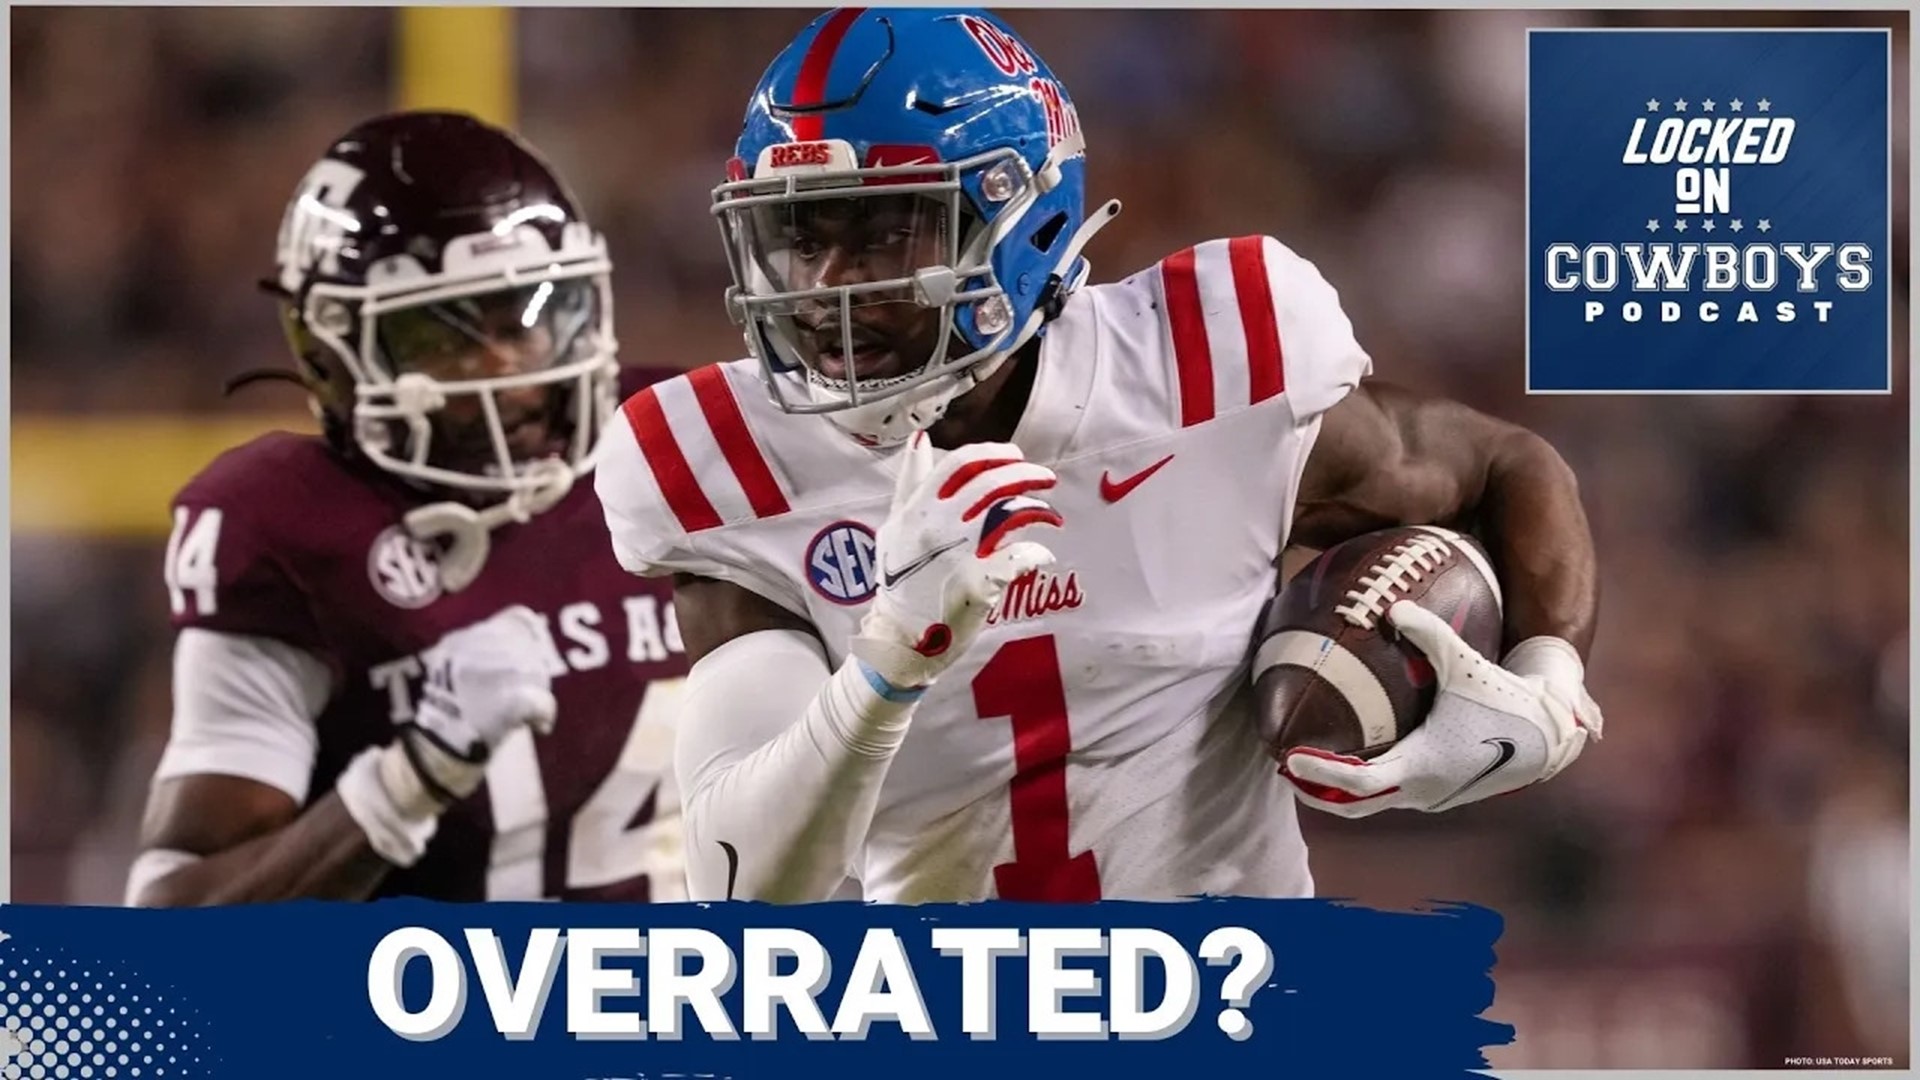 Marcus Mosher and Landon McCool reveal their biggest disagreements on prospects heading into the 2023 NFL Draft. Is Ole Miss WR Jonathan Mingo being overrated?